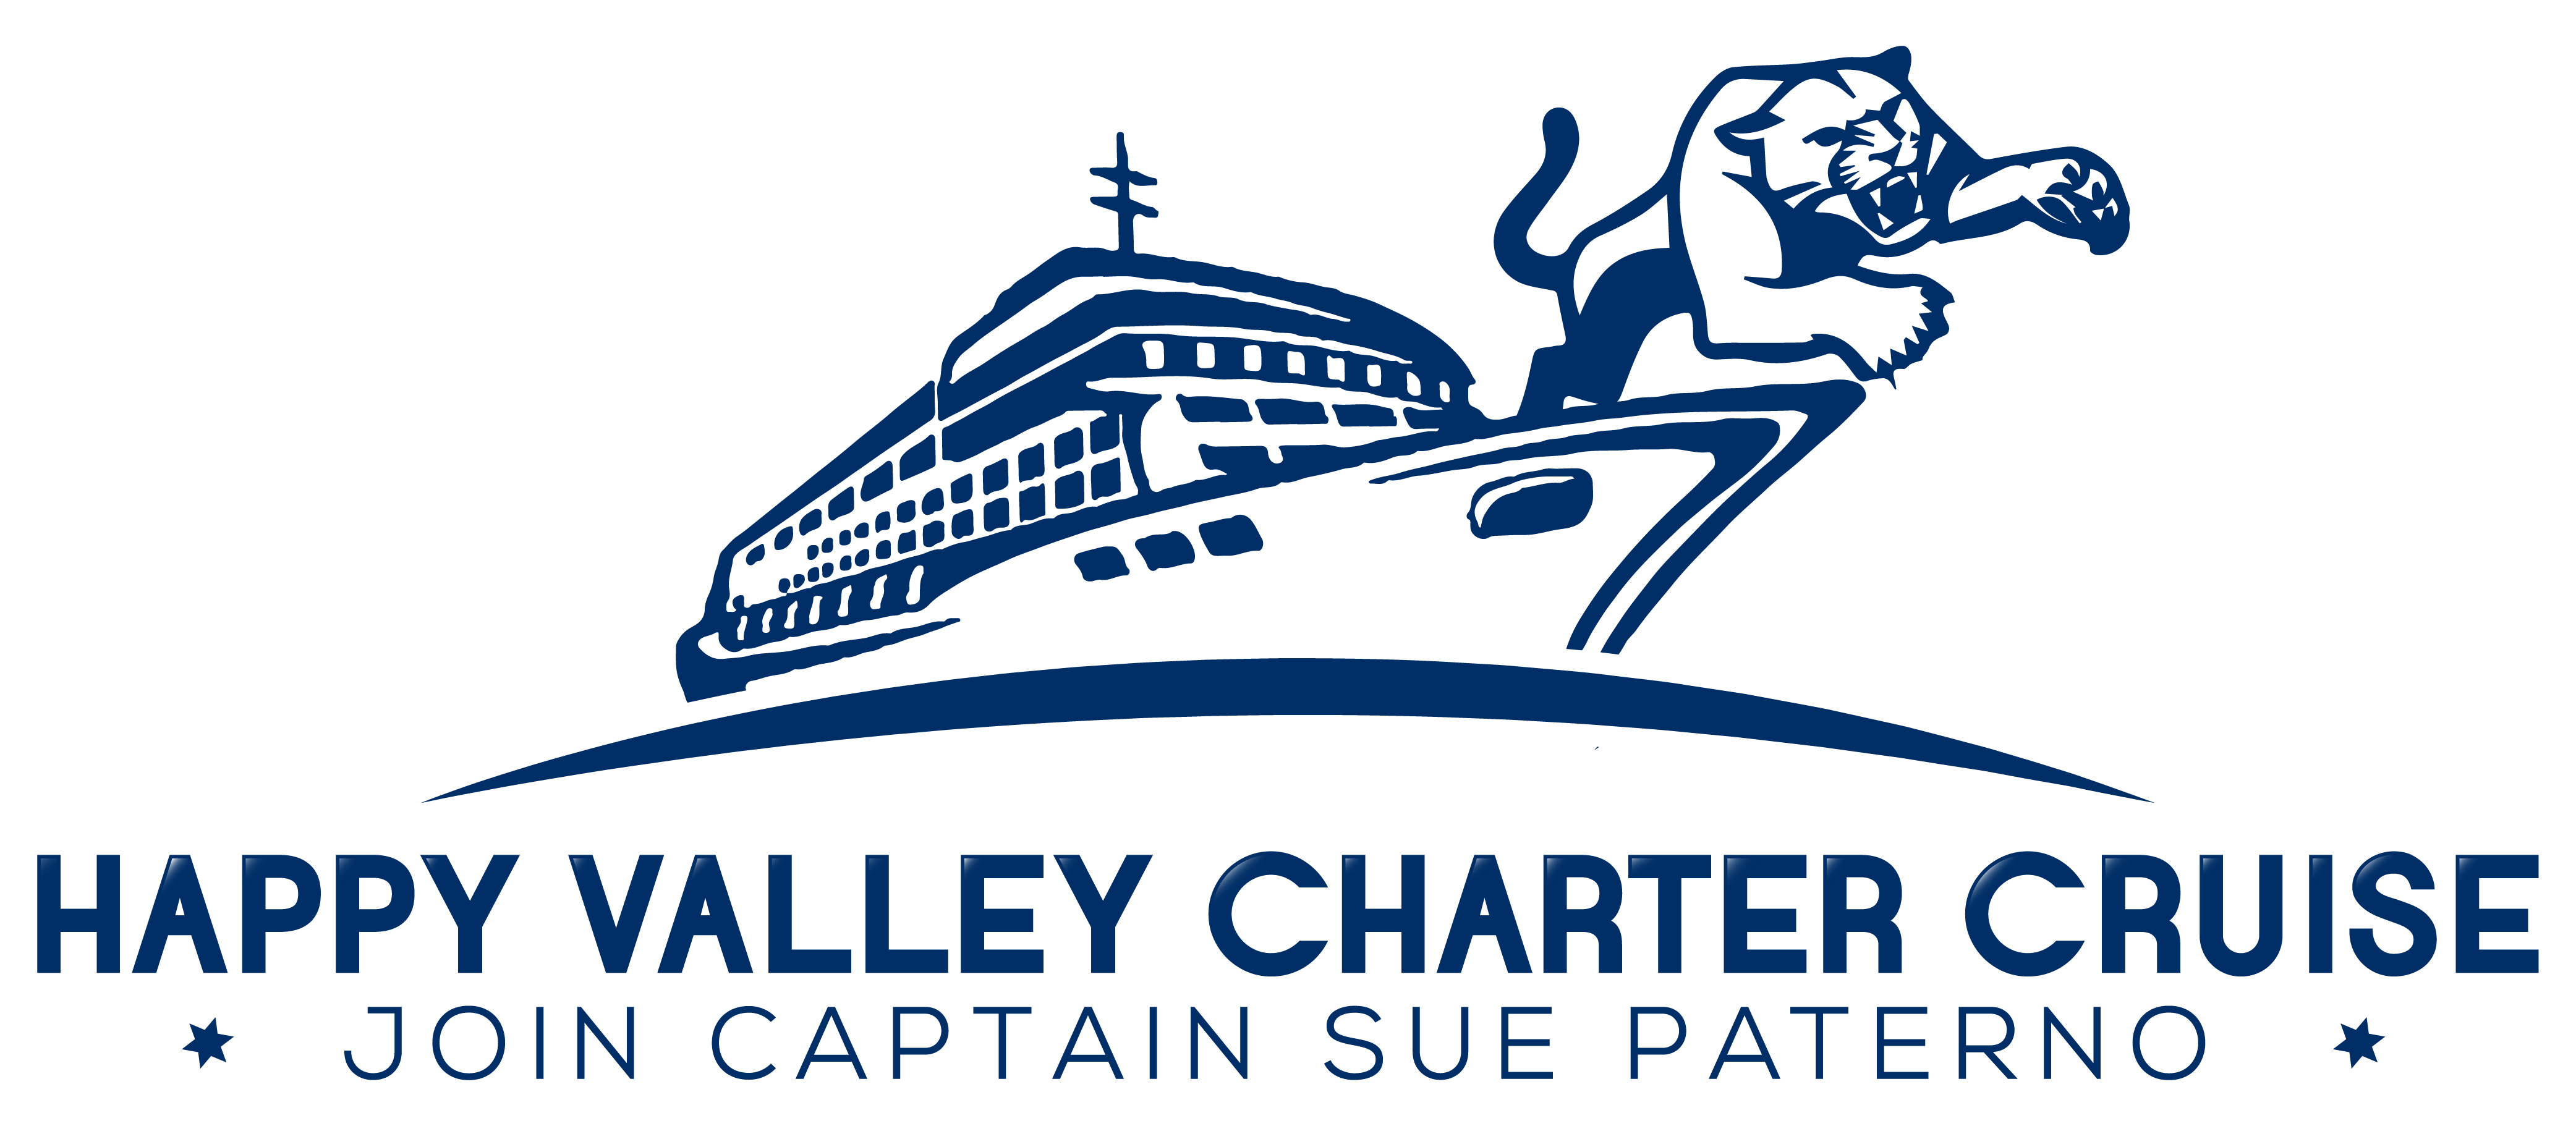 Happy Valley Charter Cruise 01